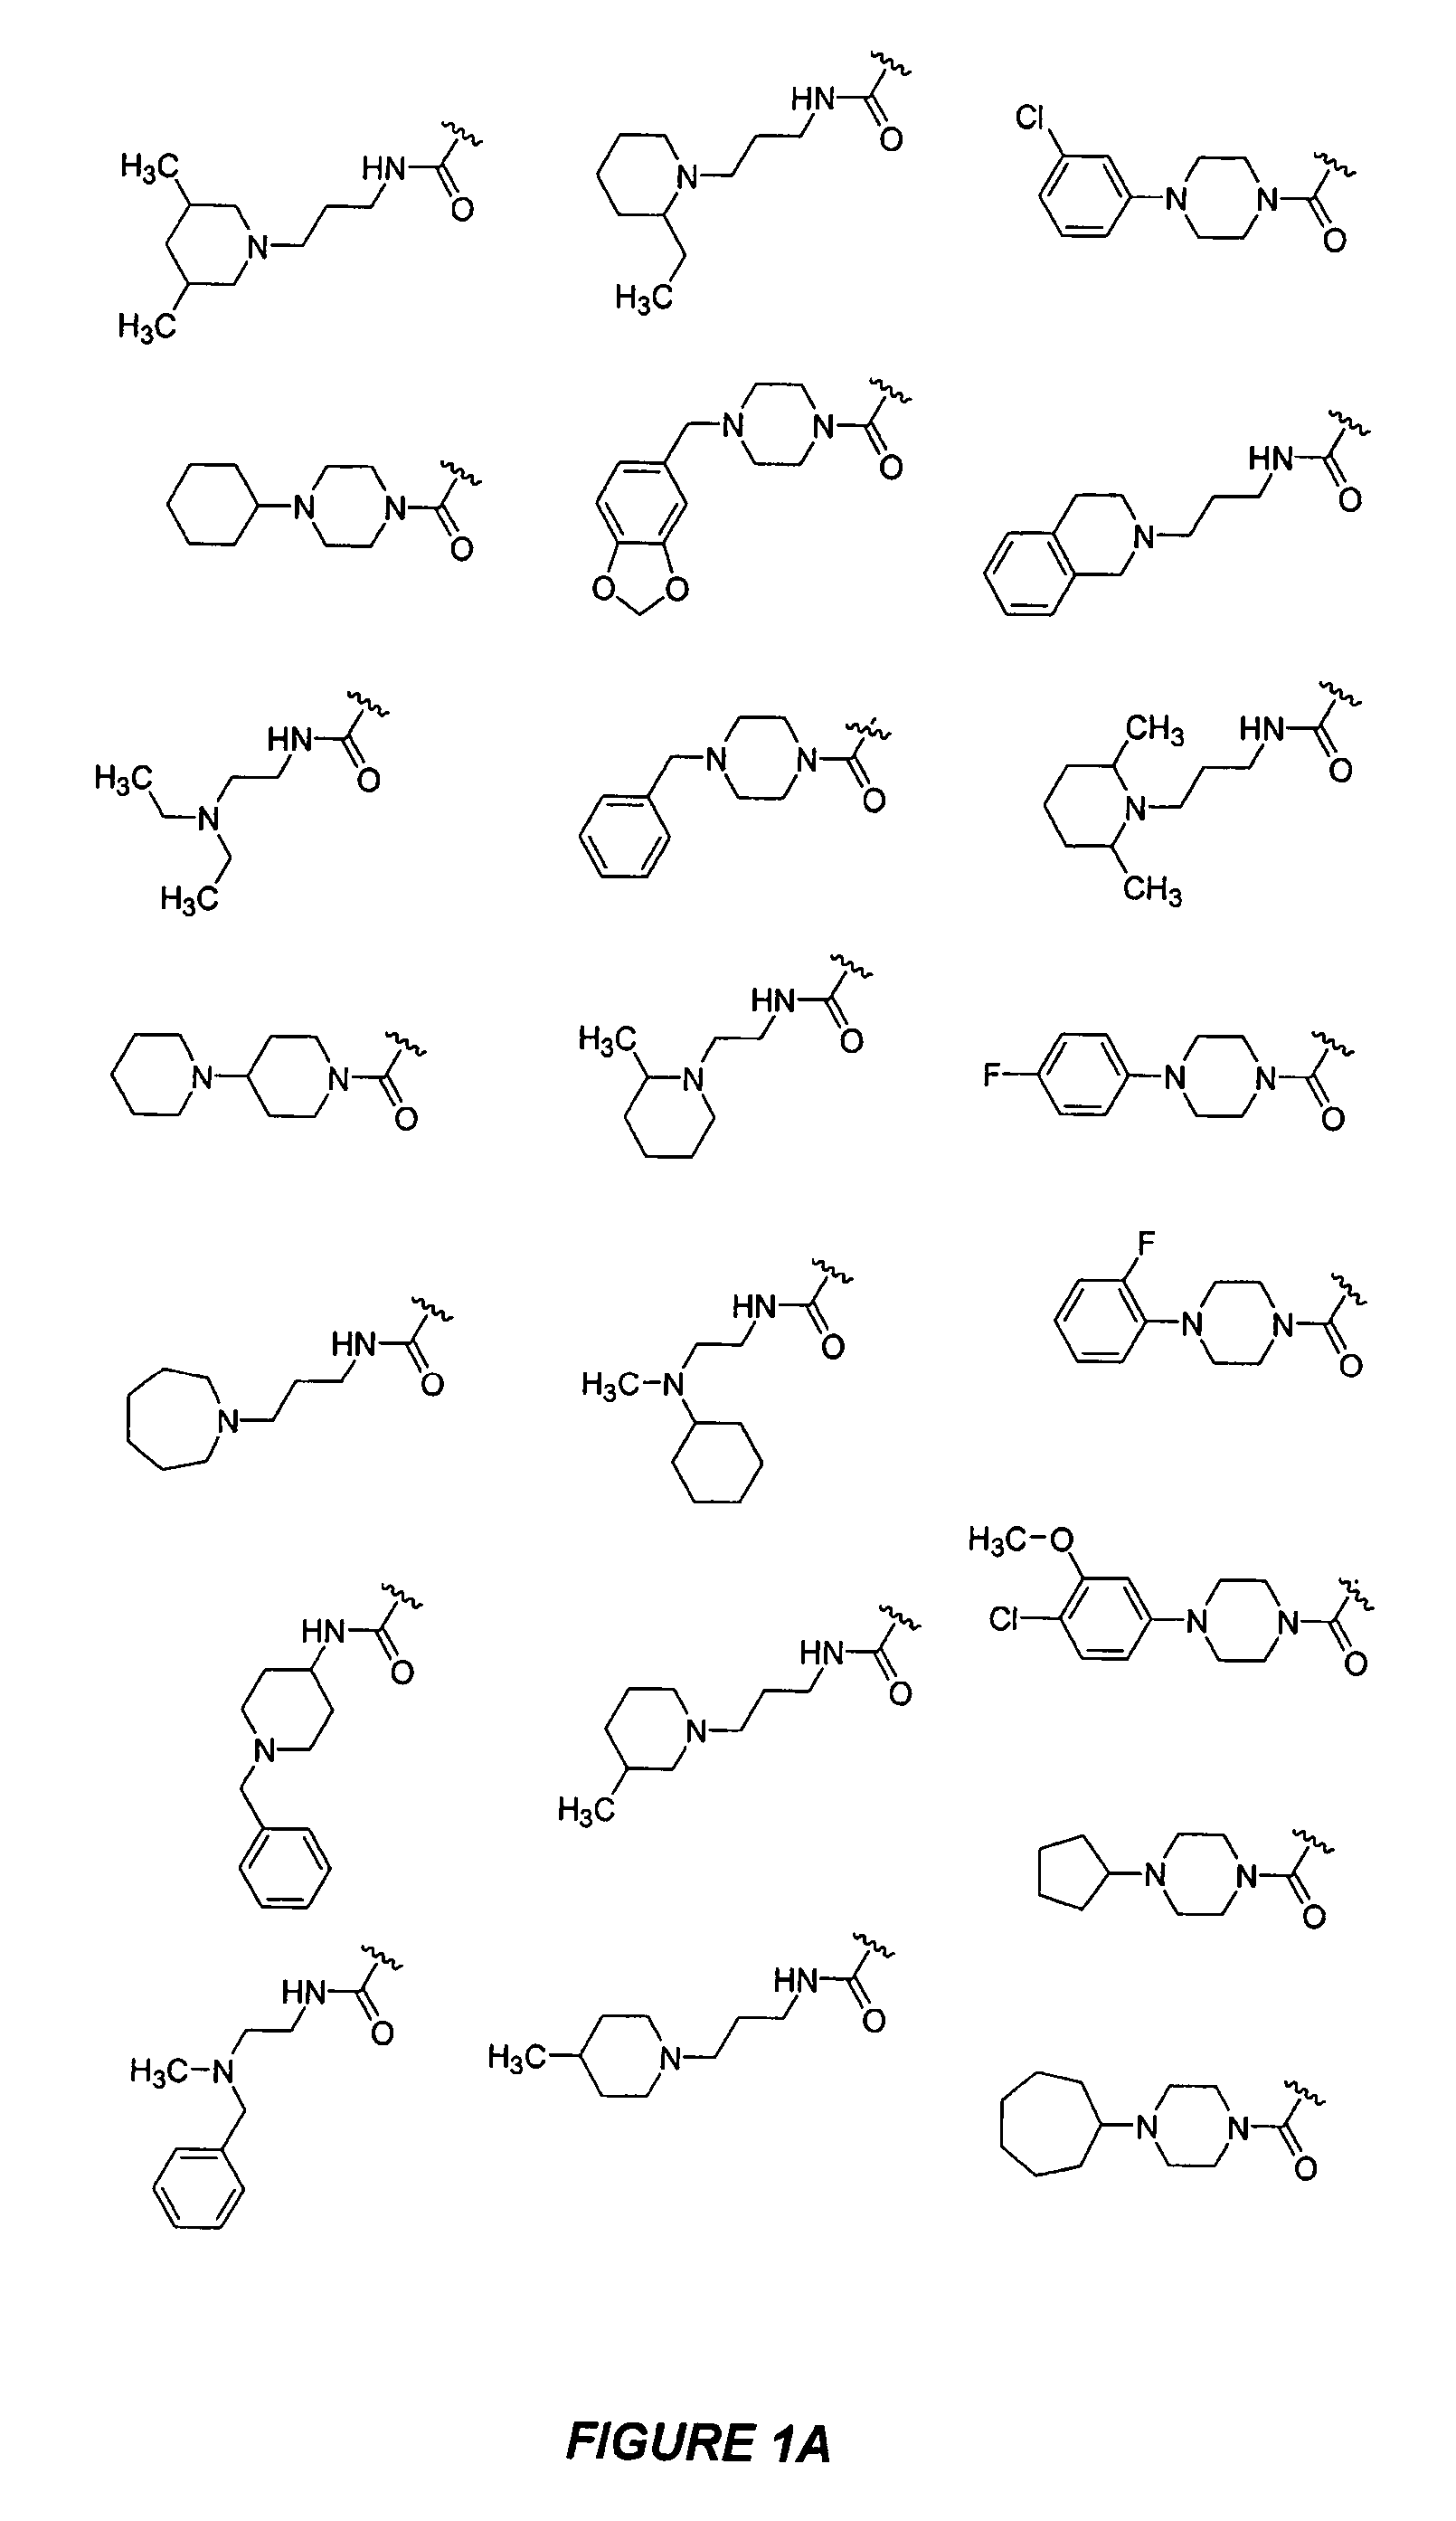 Bicyclic, nitrogen-containing compounds modulating CXCR4 and/or CCXCKR2